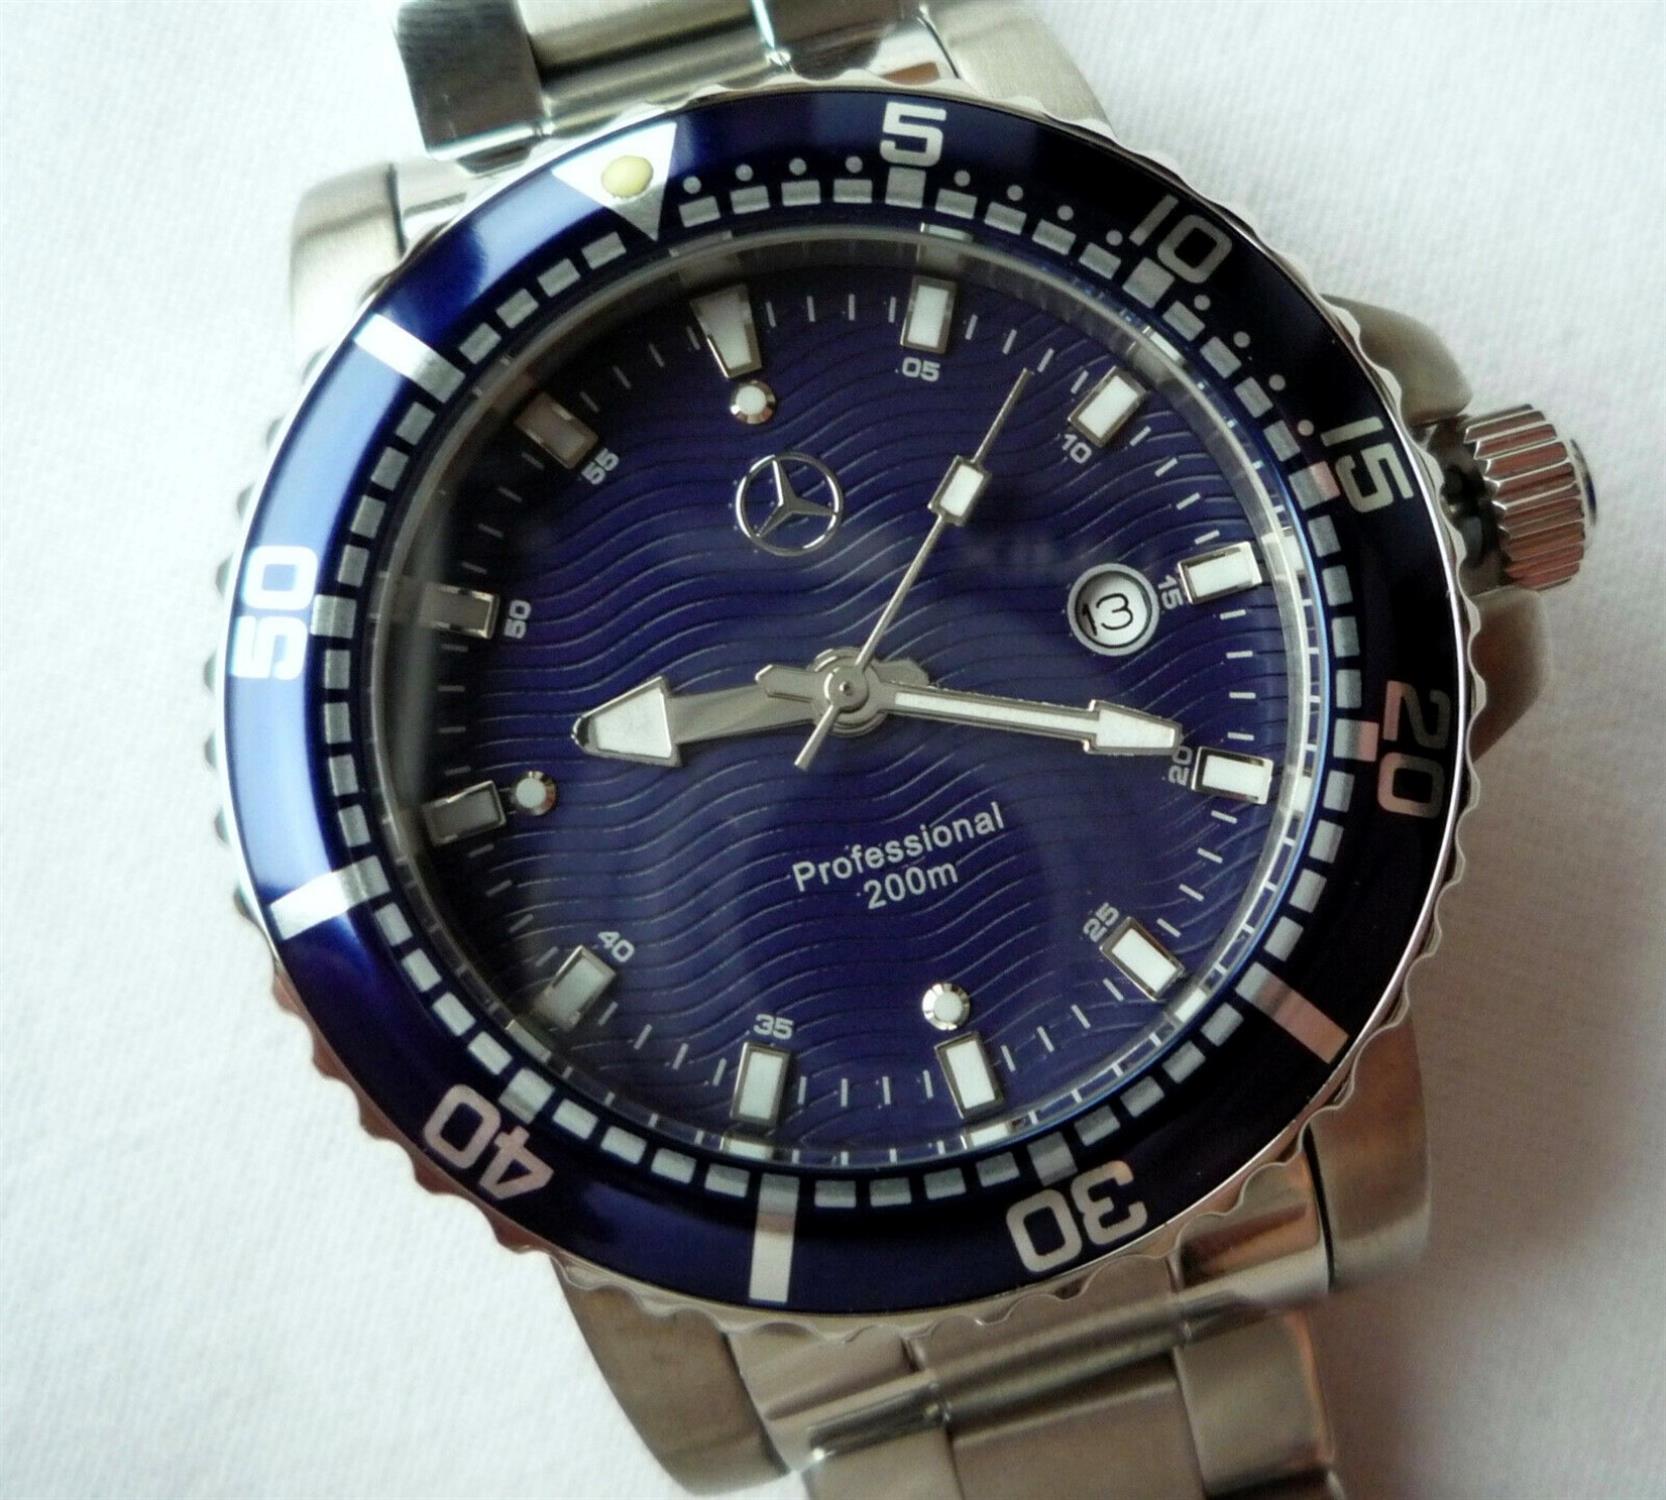 A Super Rare and Unused Mercedes-Benz Submariner Classic Divers Professional Sports Watch - Image 4 of 8